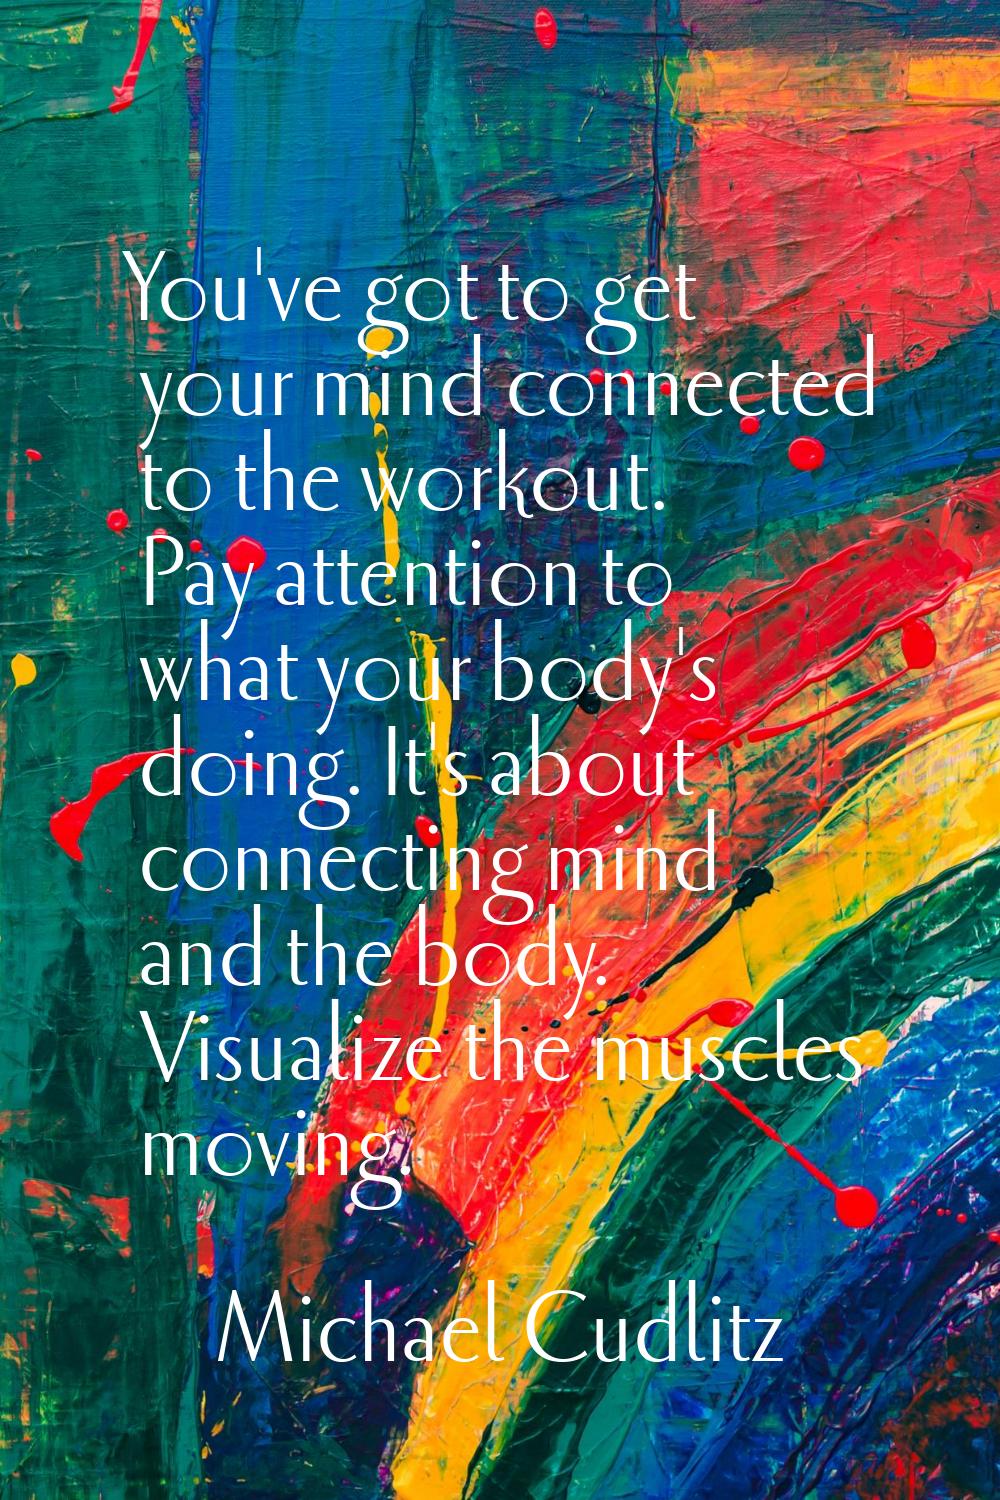 You've got to get your mind connected to the workout. Pay attention to what your body's doing. It's